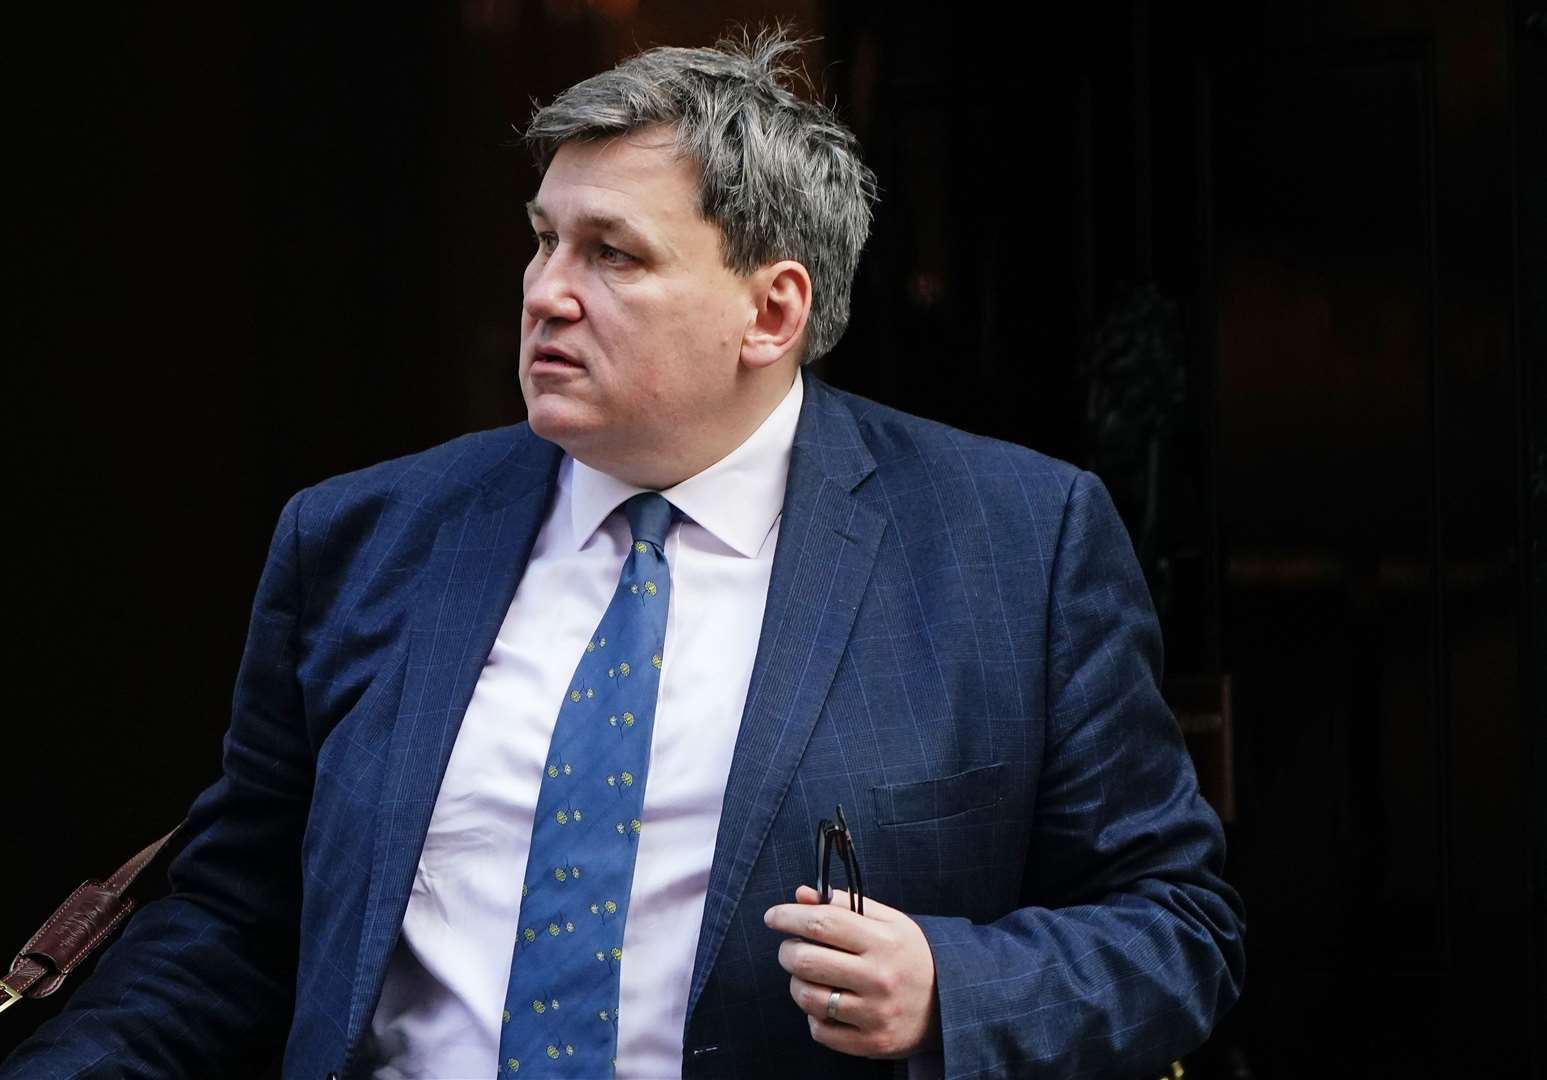 Policing Minister Kit Malthouse said issuing fines was evidence police believed the law has been broken (Aaron Chown/PA)